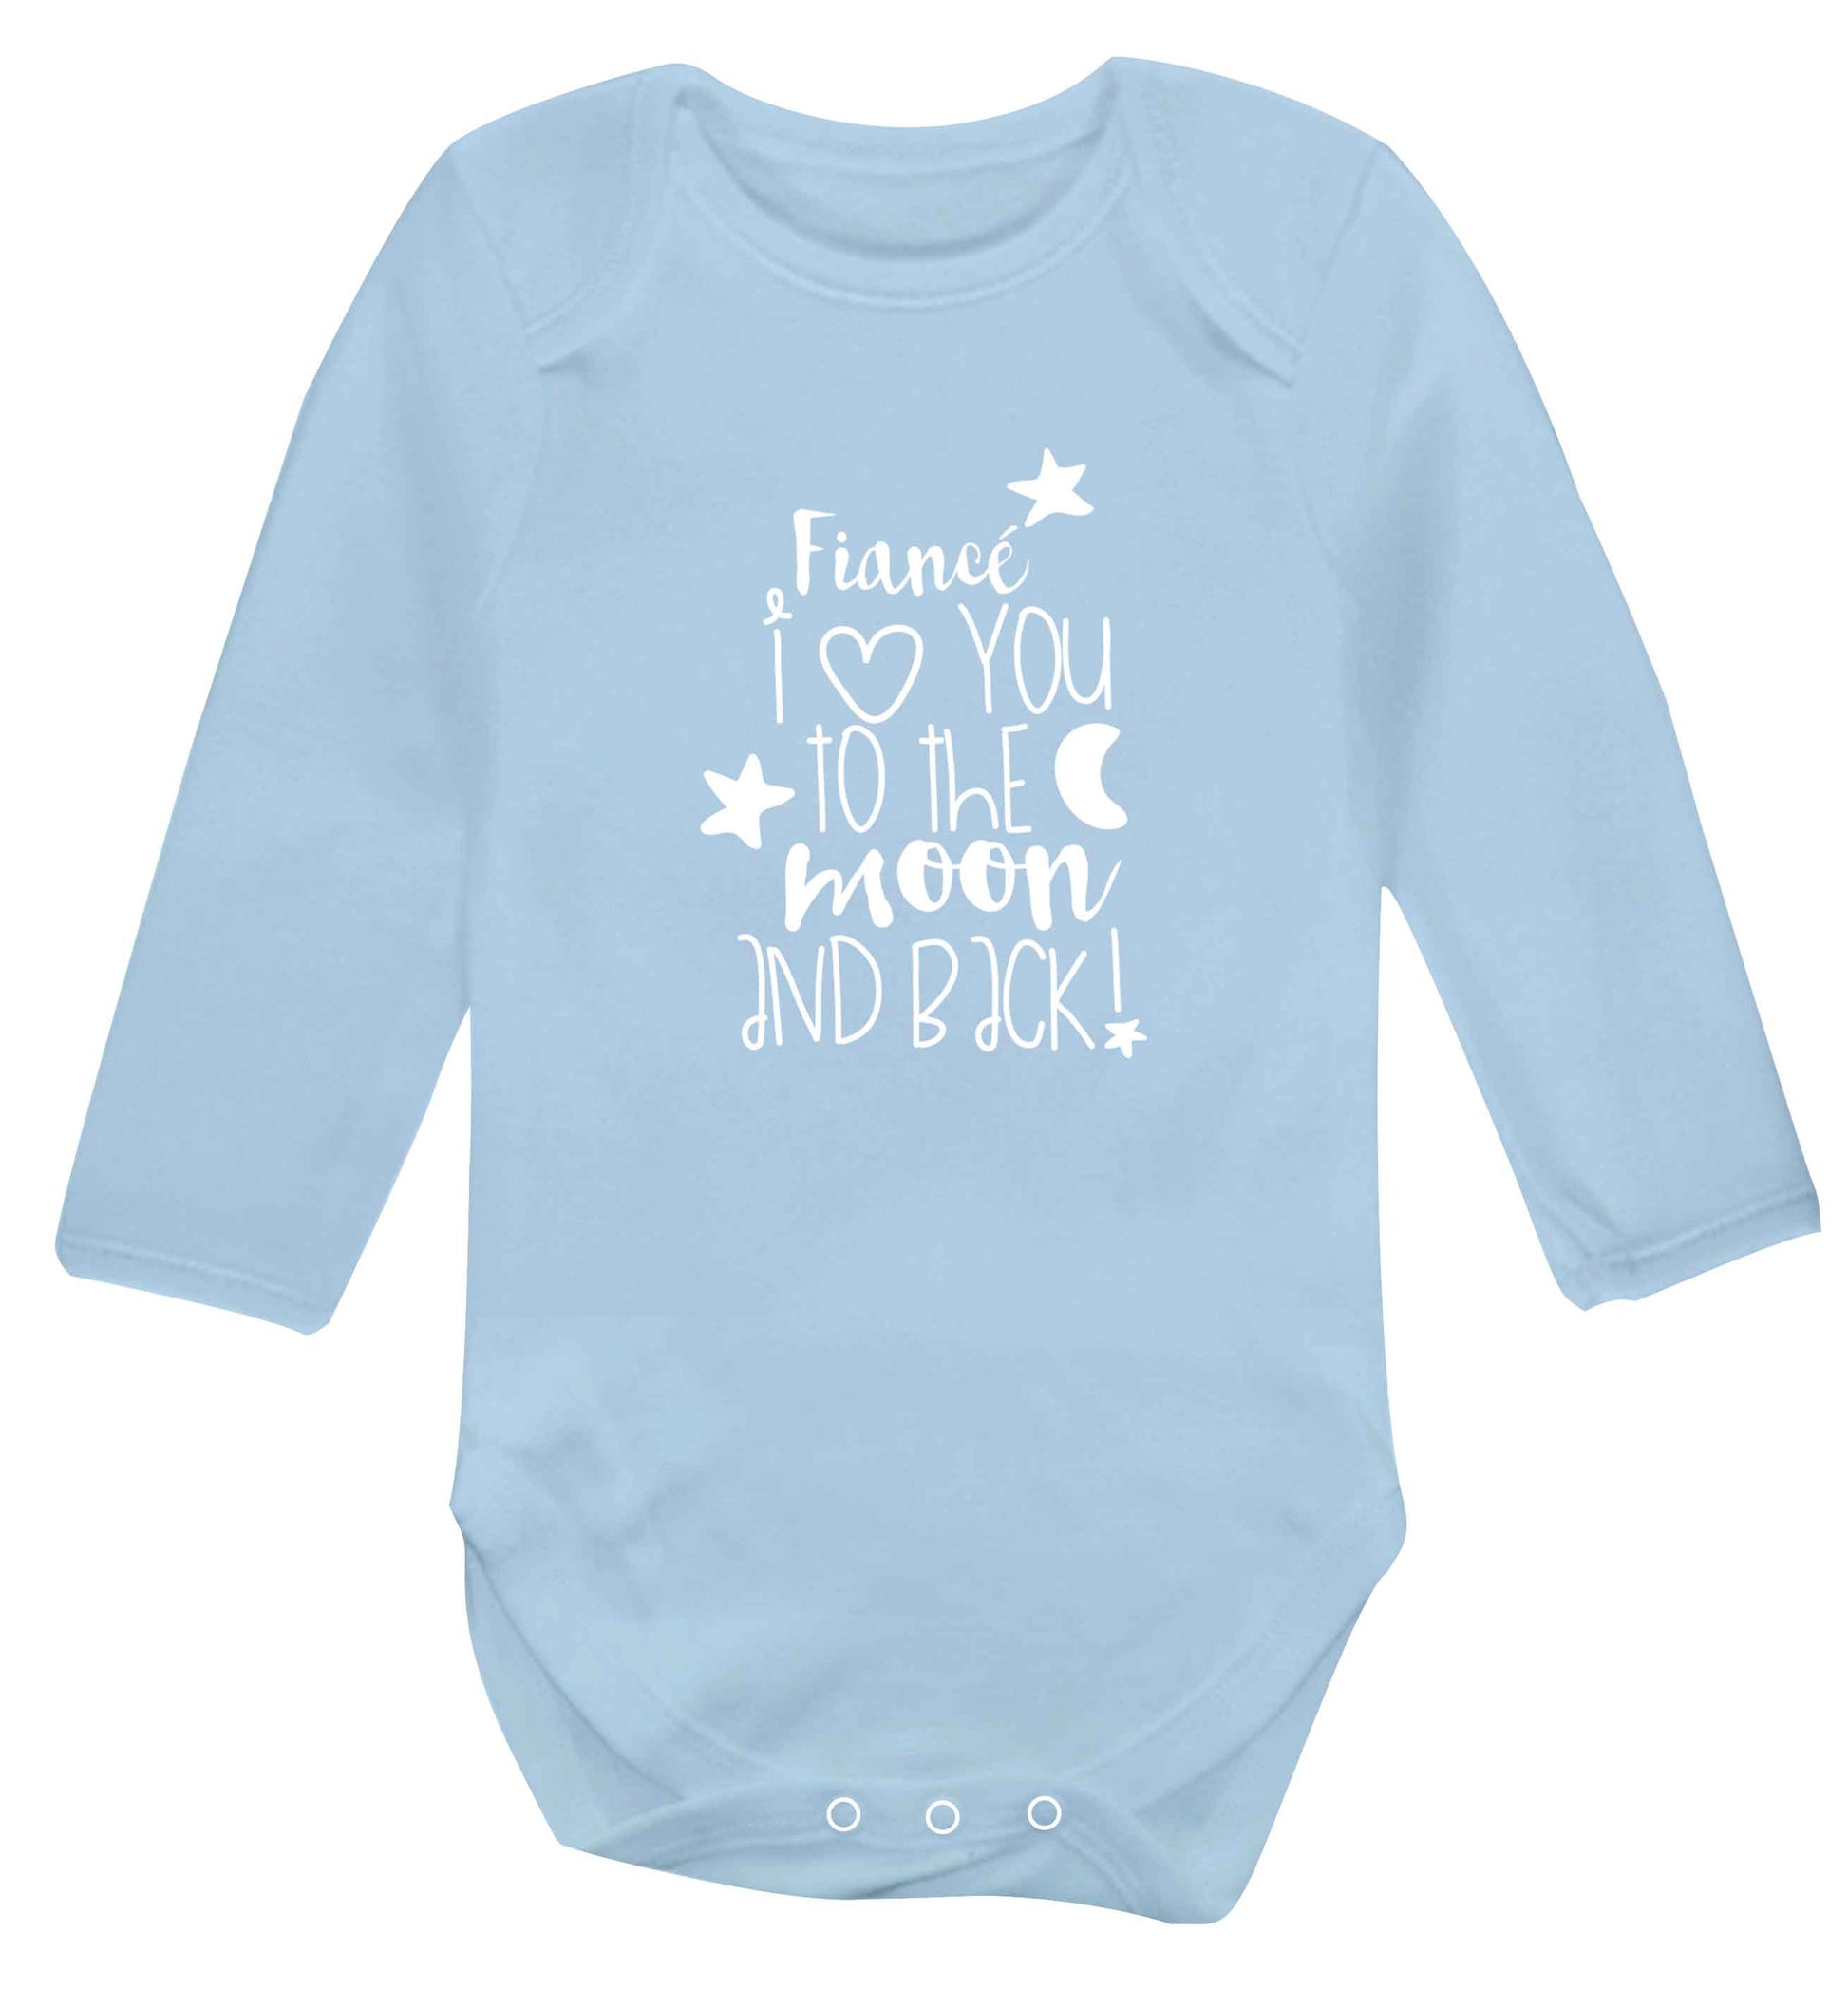 Fianc√© I love you to the moon and back baby vest long sleeved pale blue 6-12 months